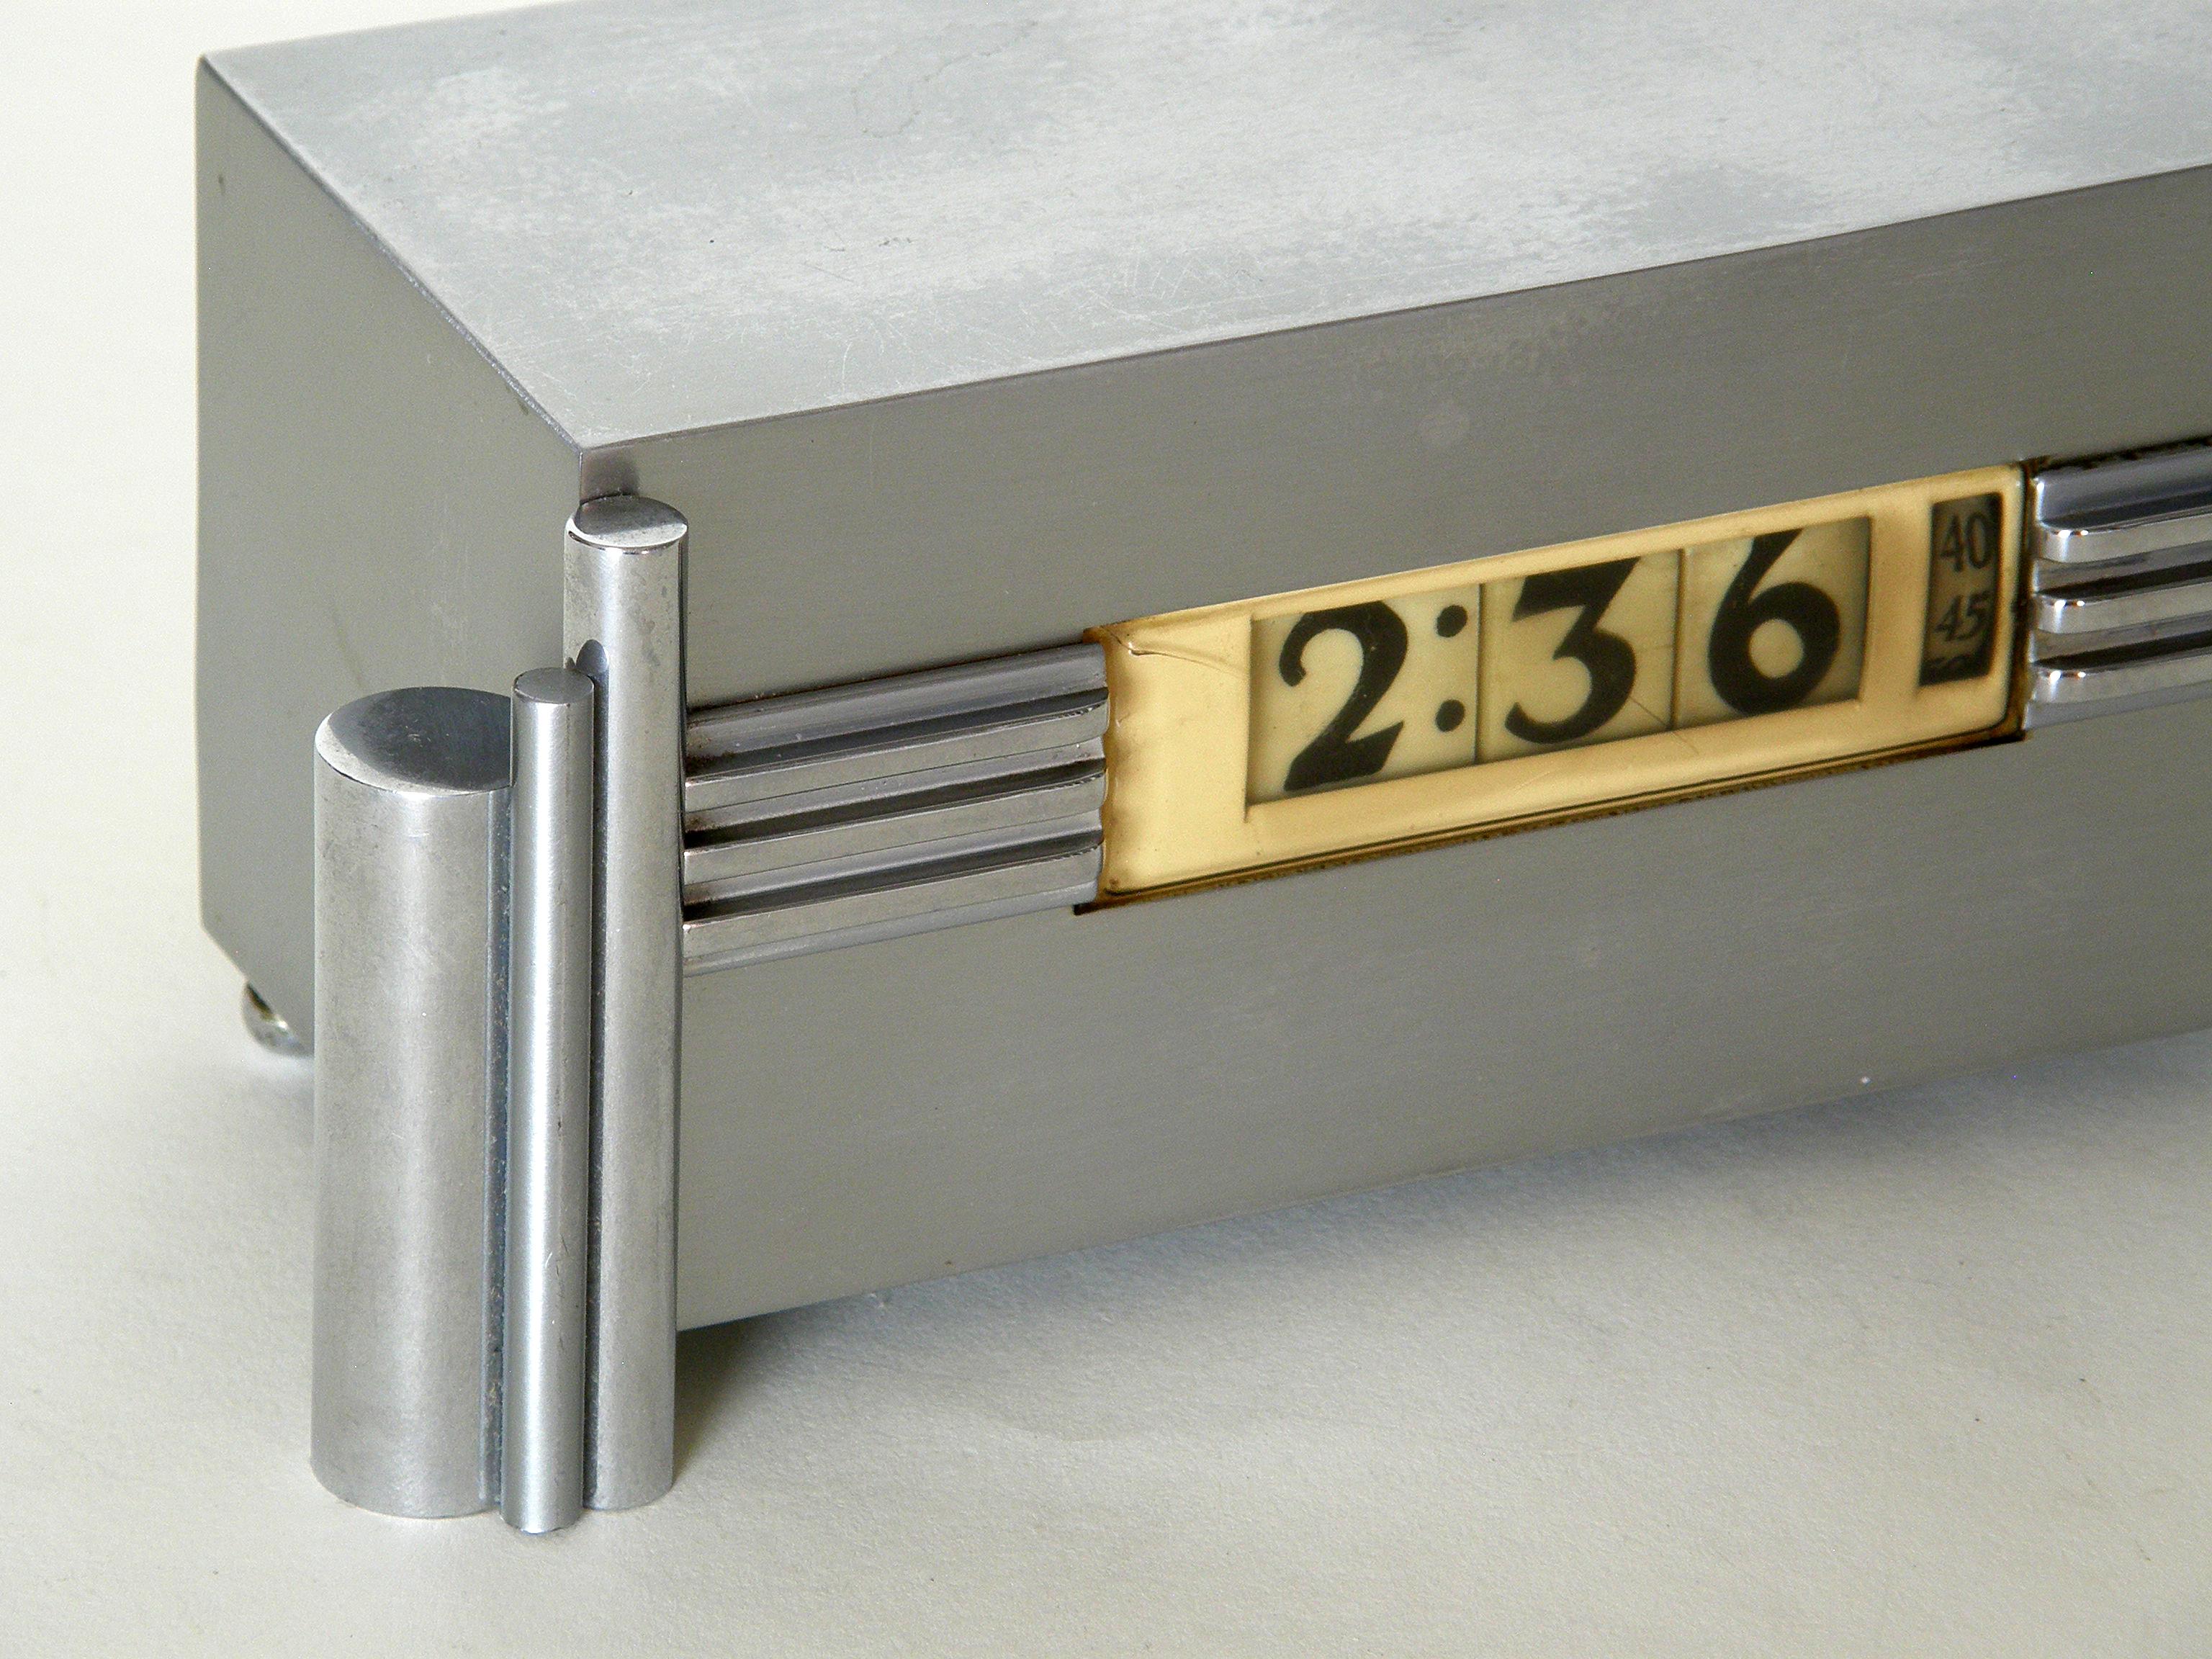 American Lawson Art Deco Digital Table Clock Designed by Ferher and Adomatis For Sale